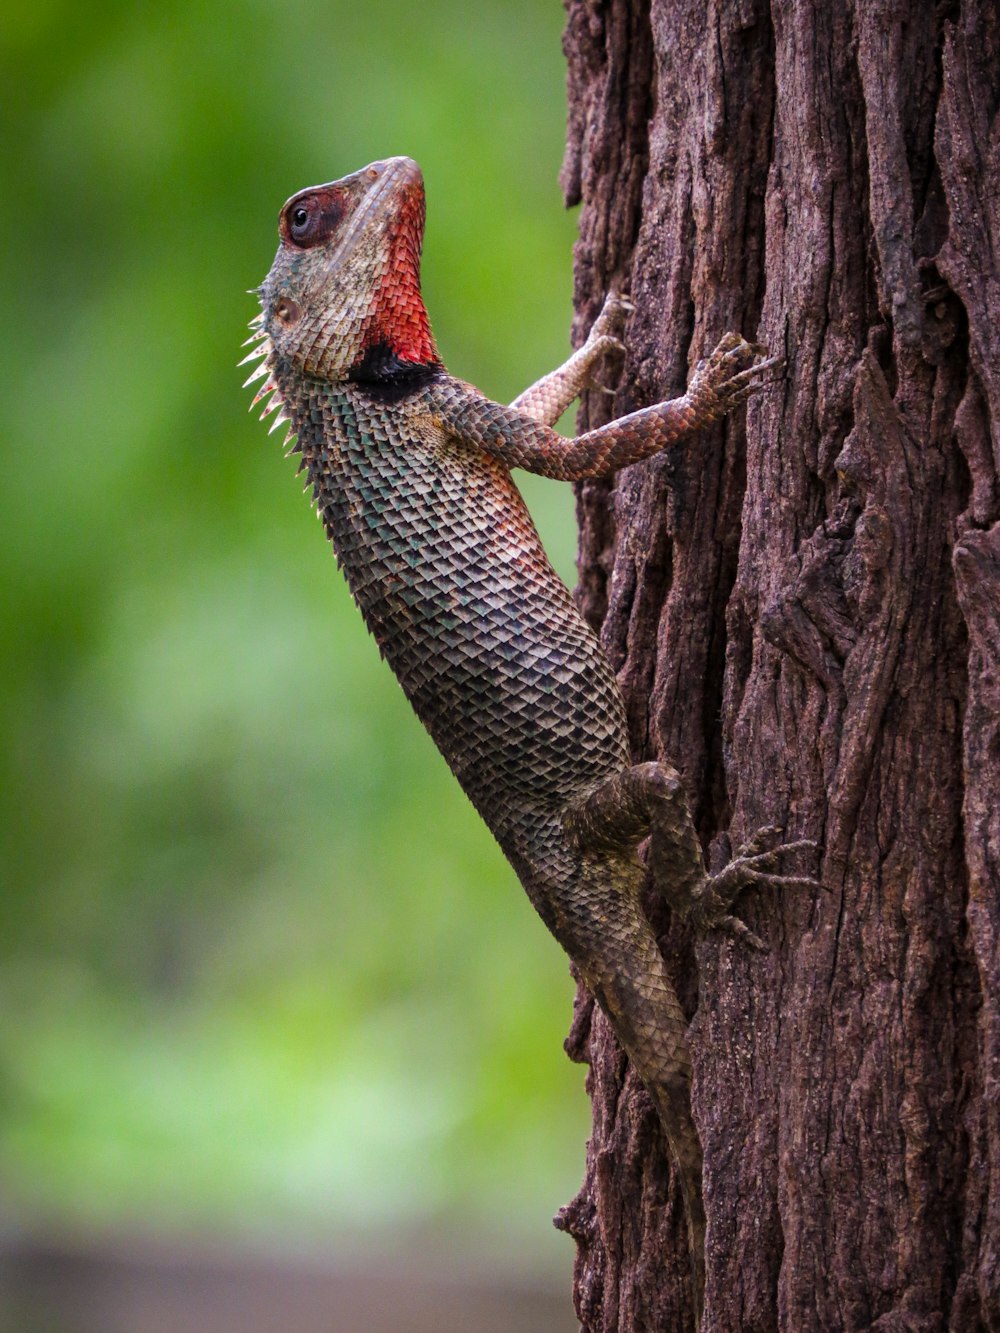 brown and black lizard on brown tree branch during daytime